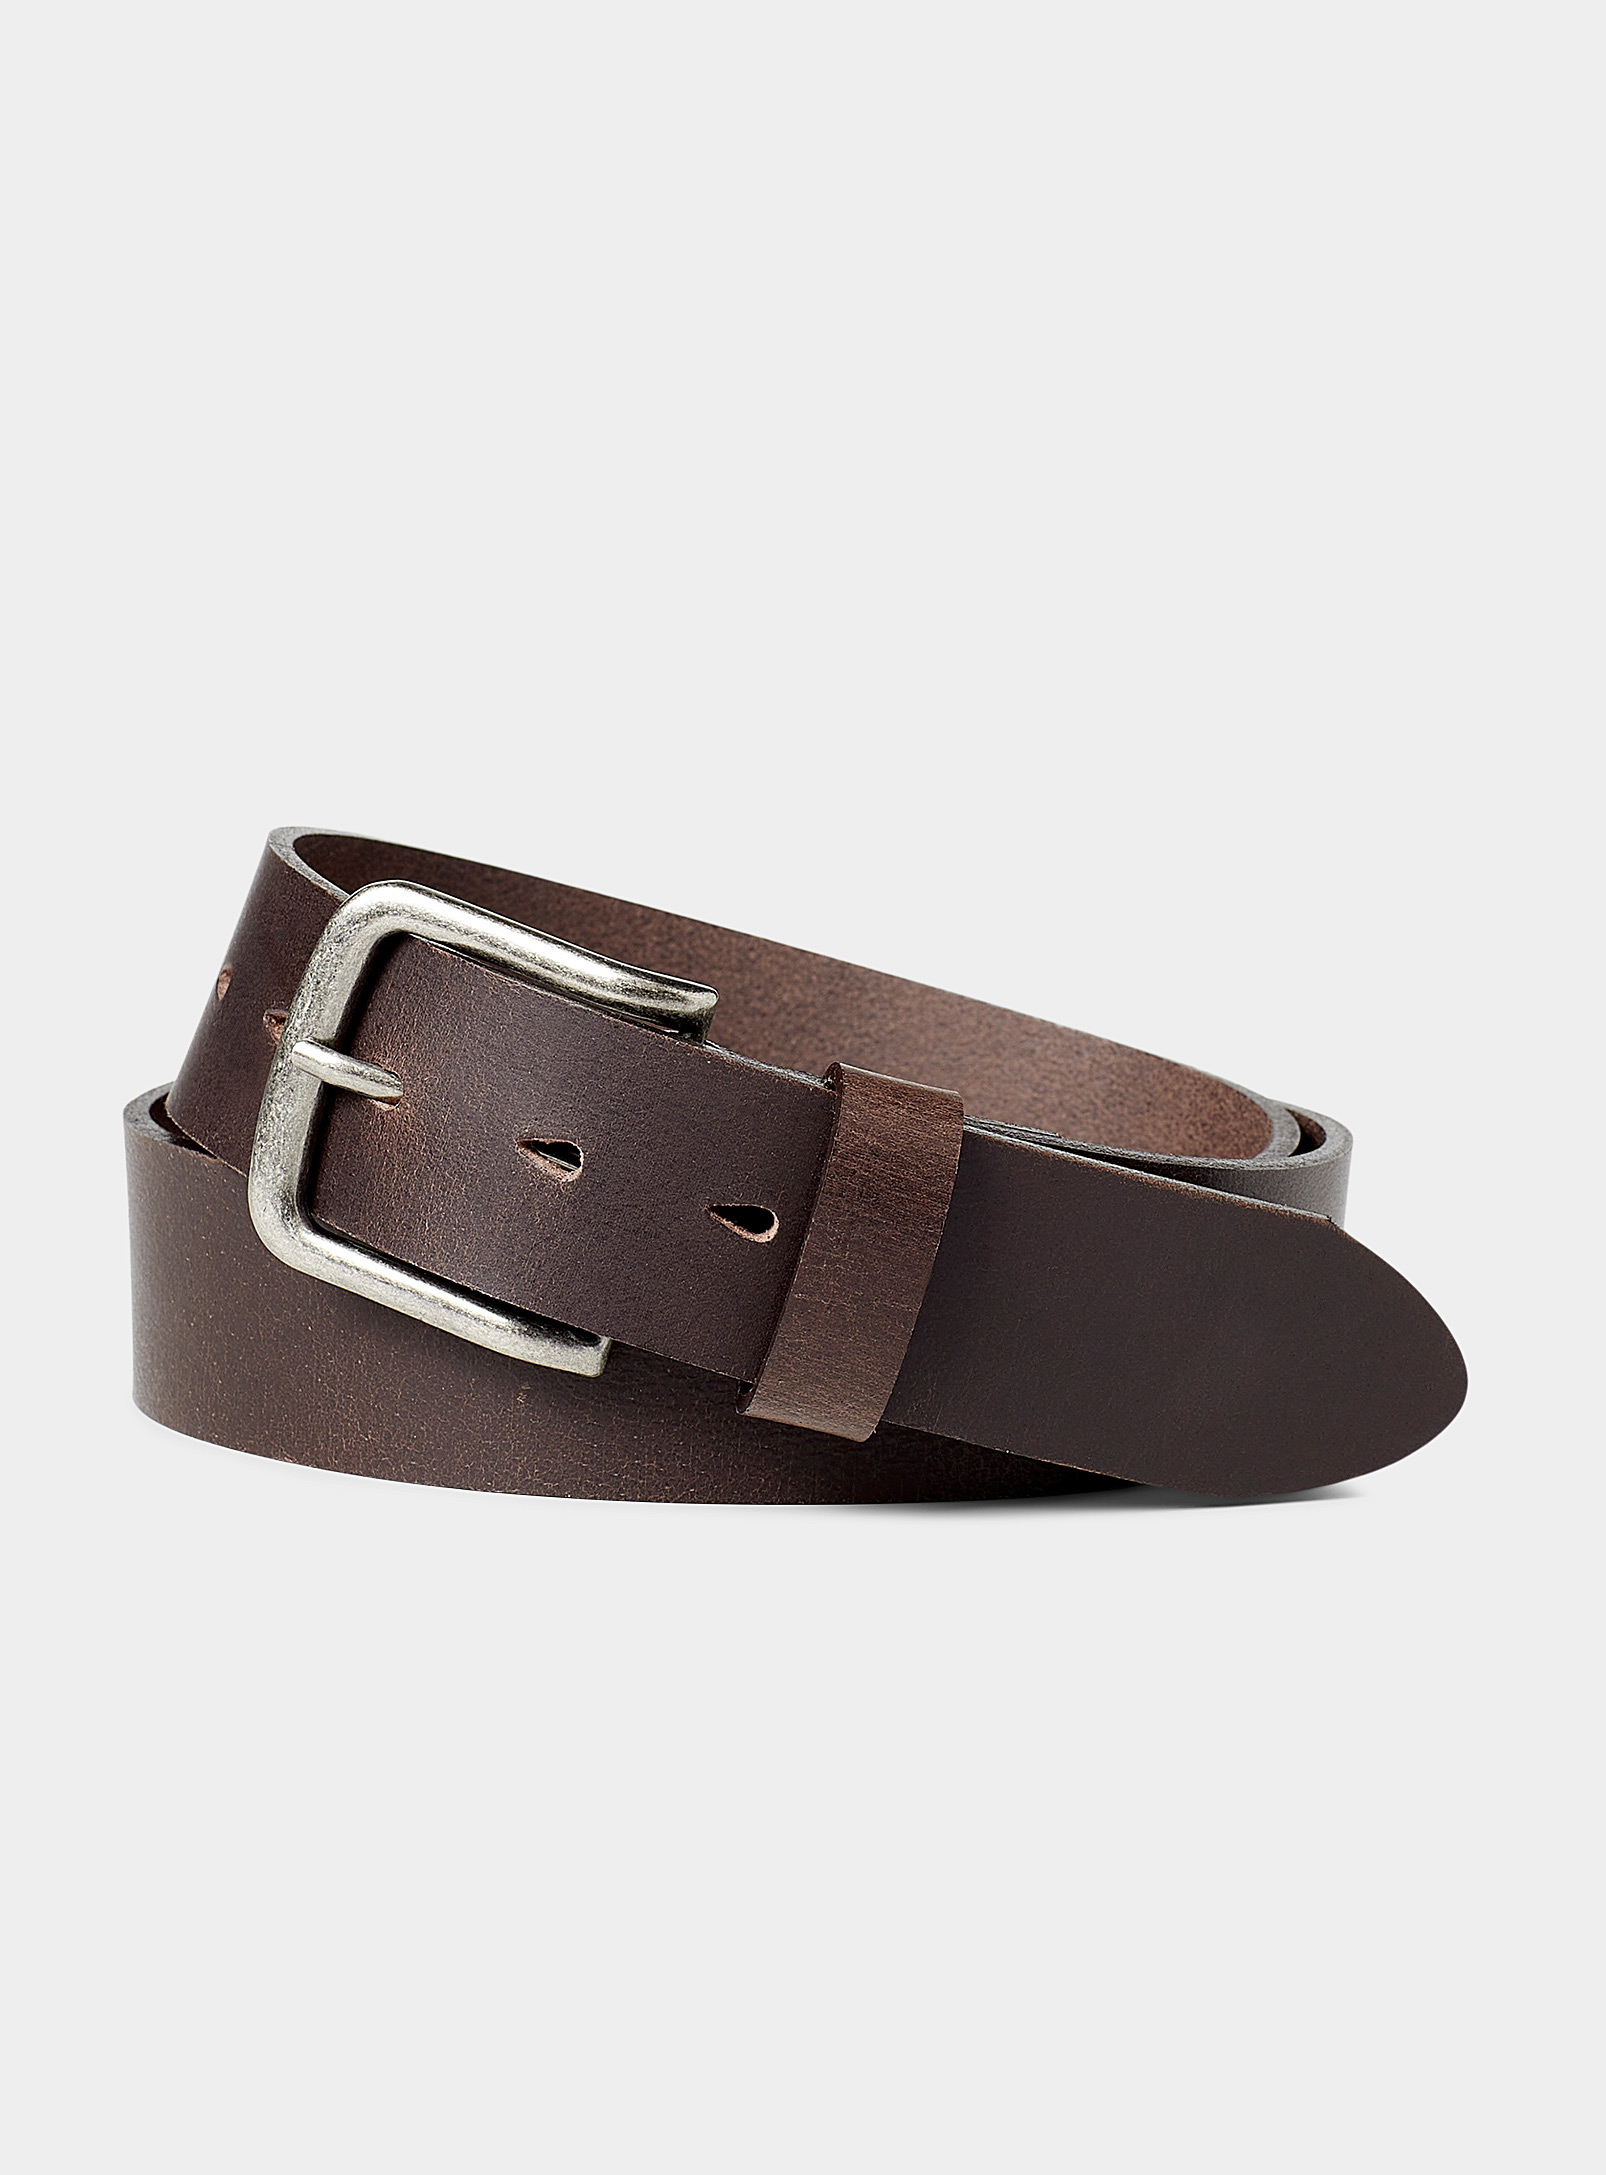 Le 31 Wide Genuine Leather Belt In Brown